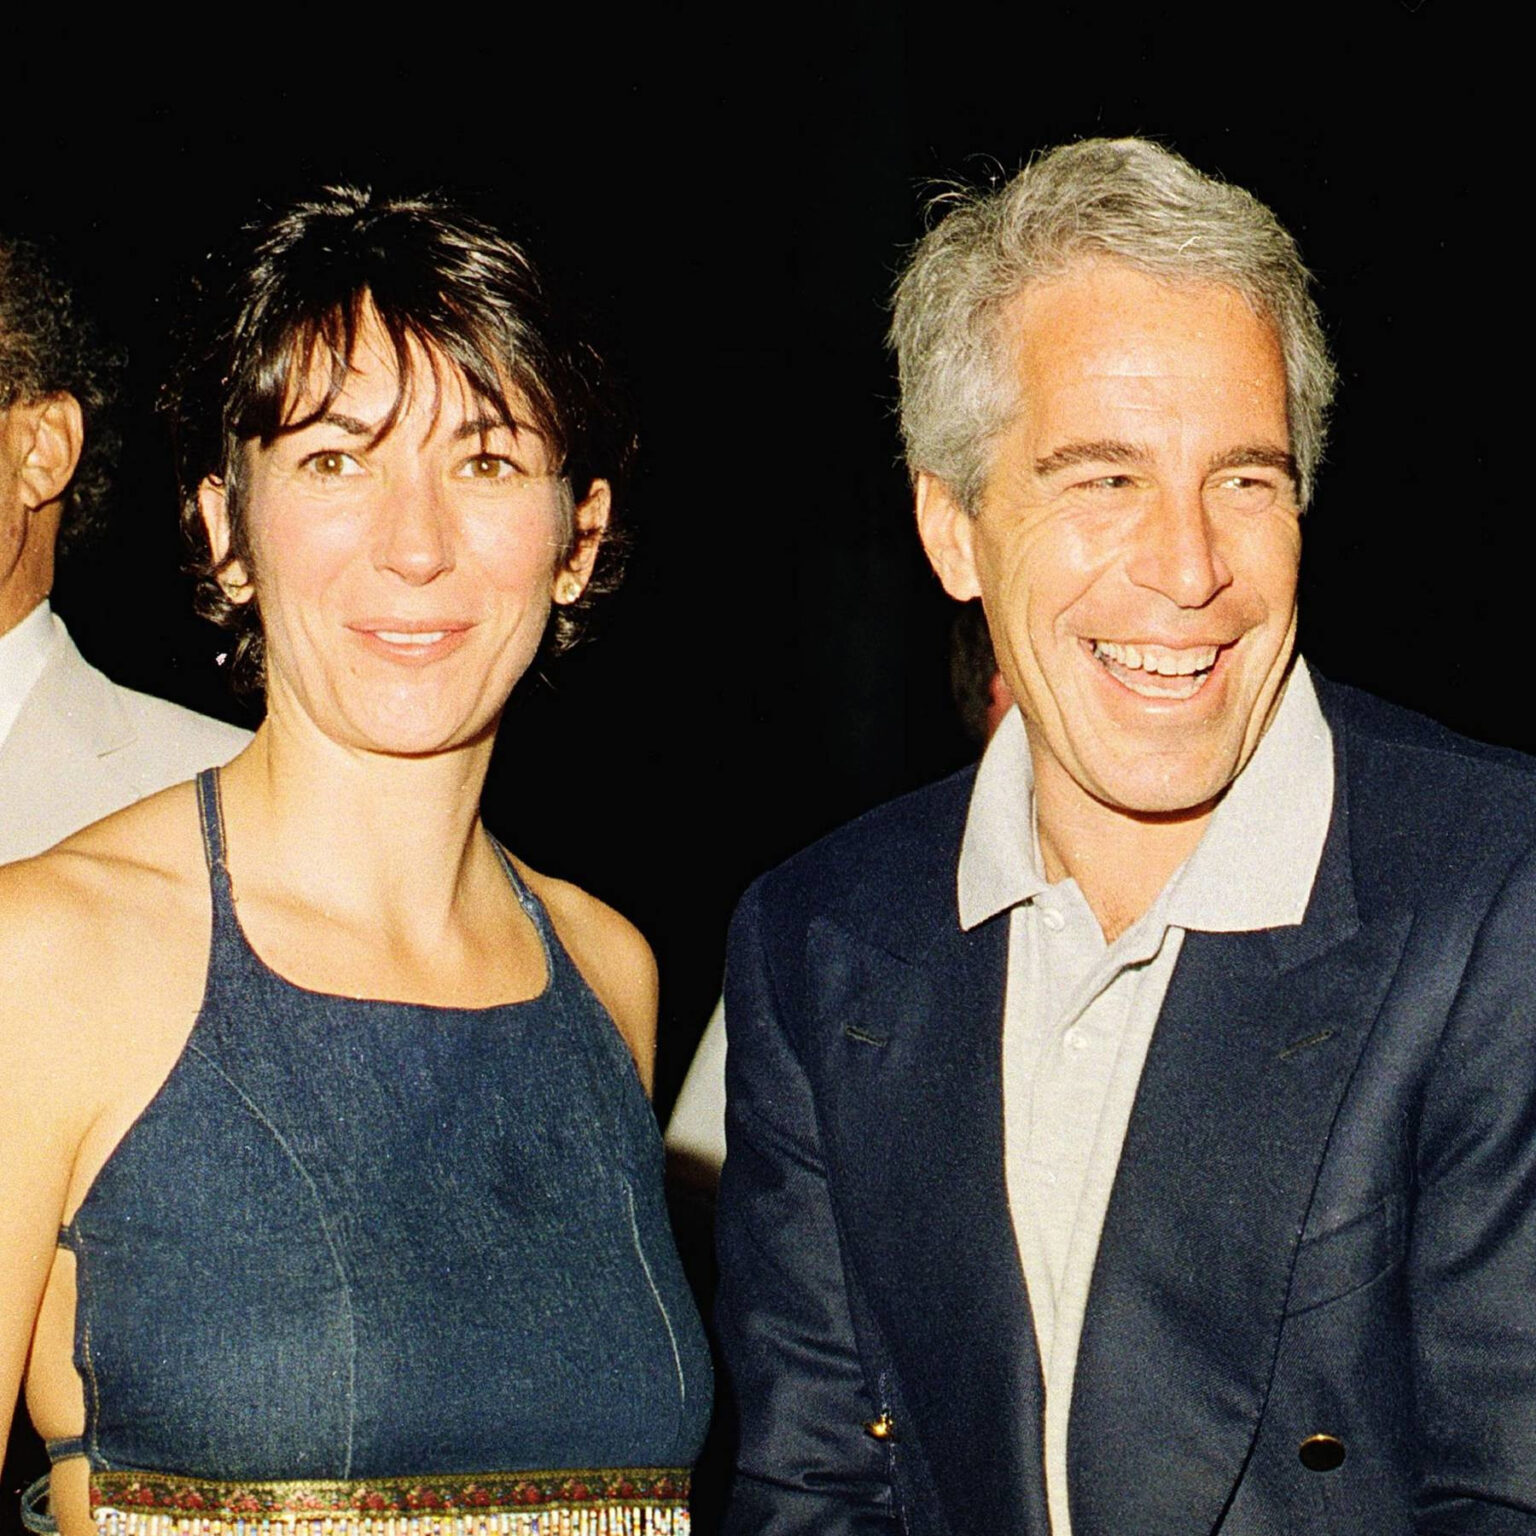 Jeffrey Epstein and Ghislaine Maxwell met in 1991. Let’s take a look at the relationship between Ghislaine Maxwell and Jeffrey Epstein.